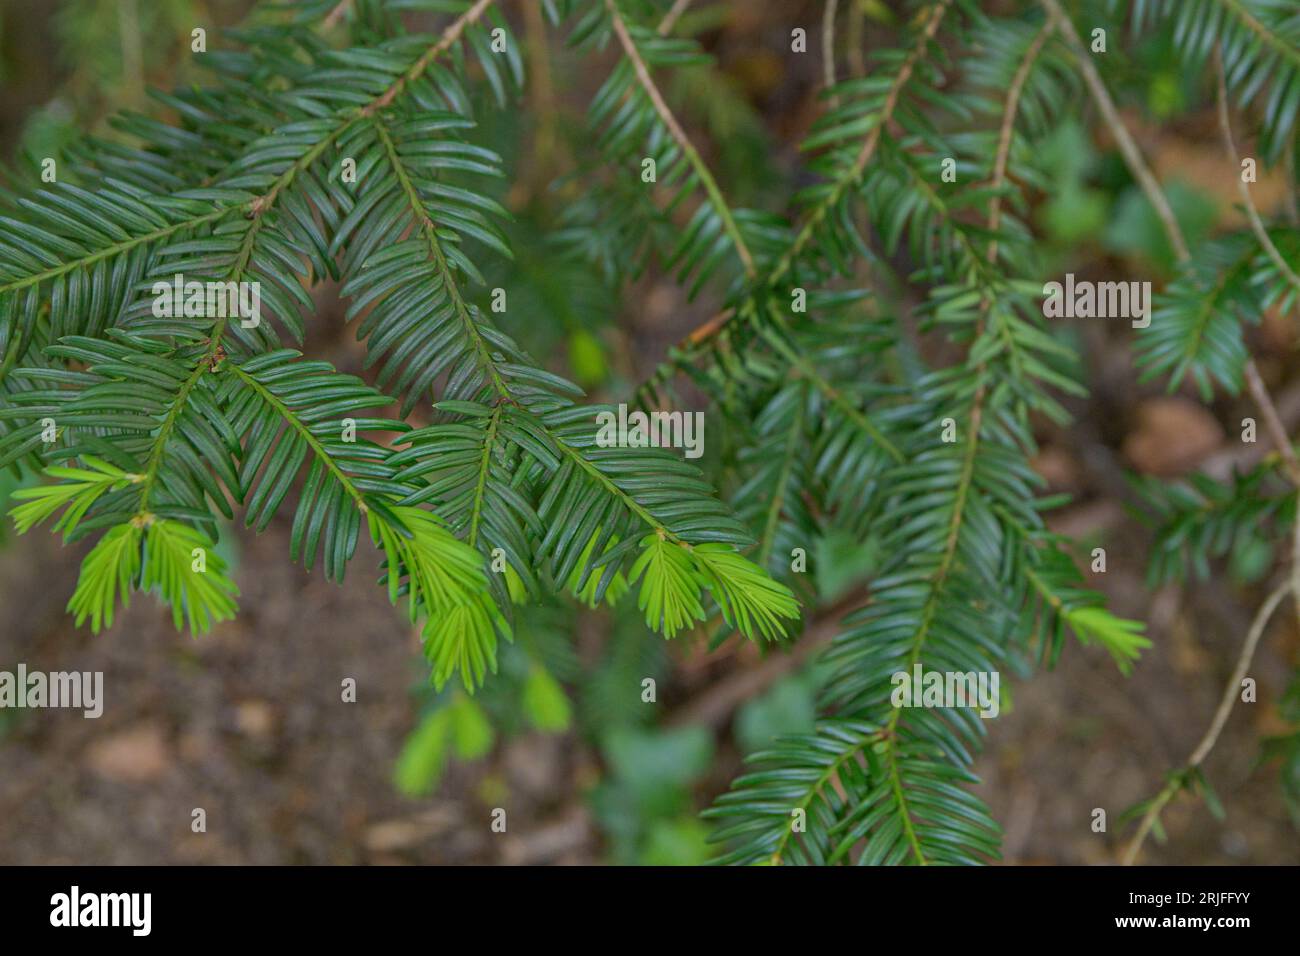 Young shoots on the branches of a coniferous tree Stock Photo